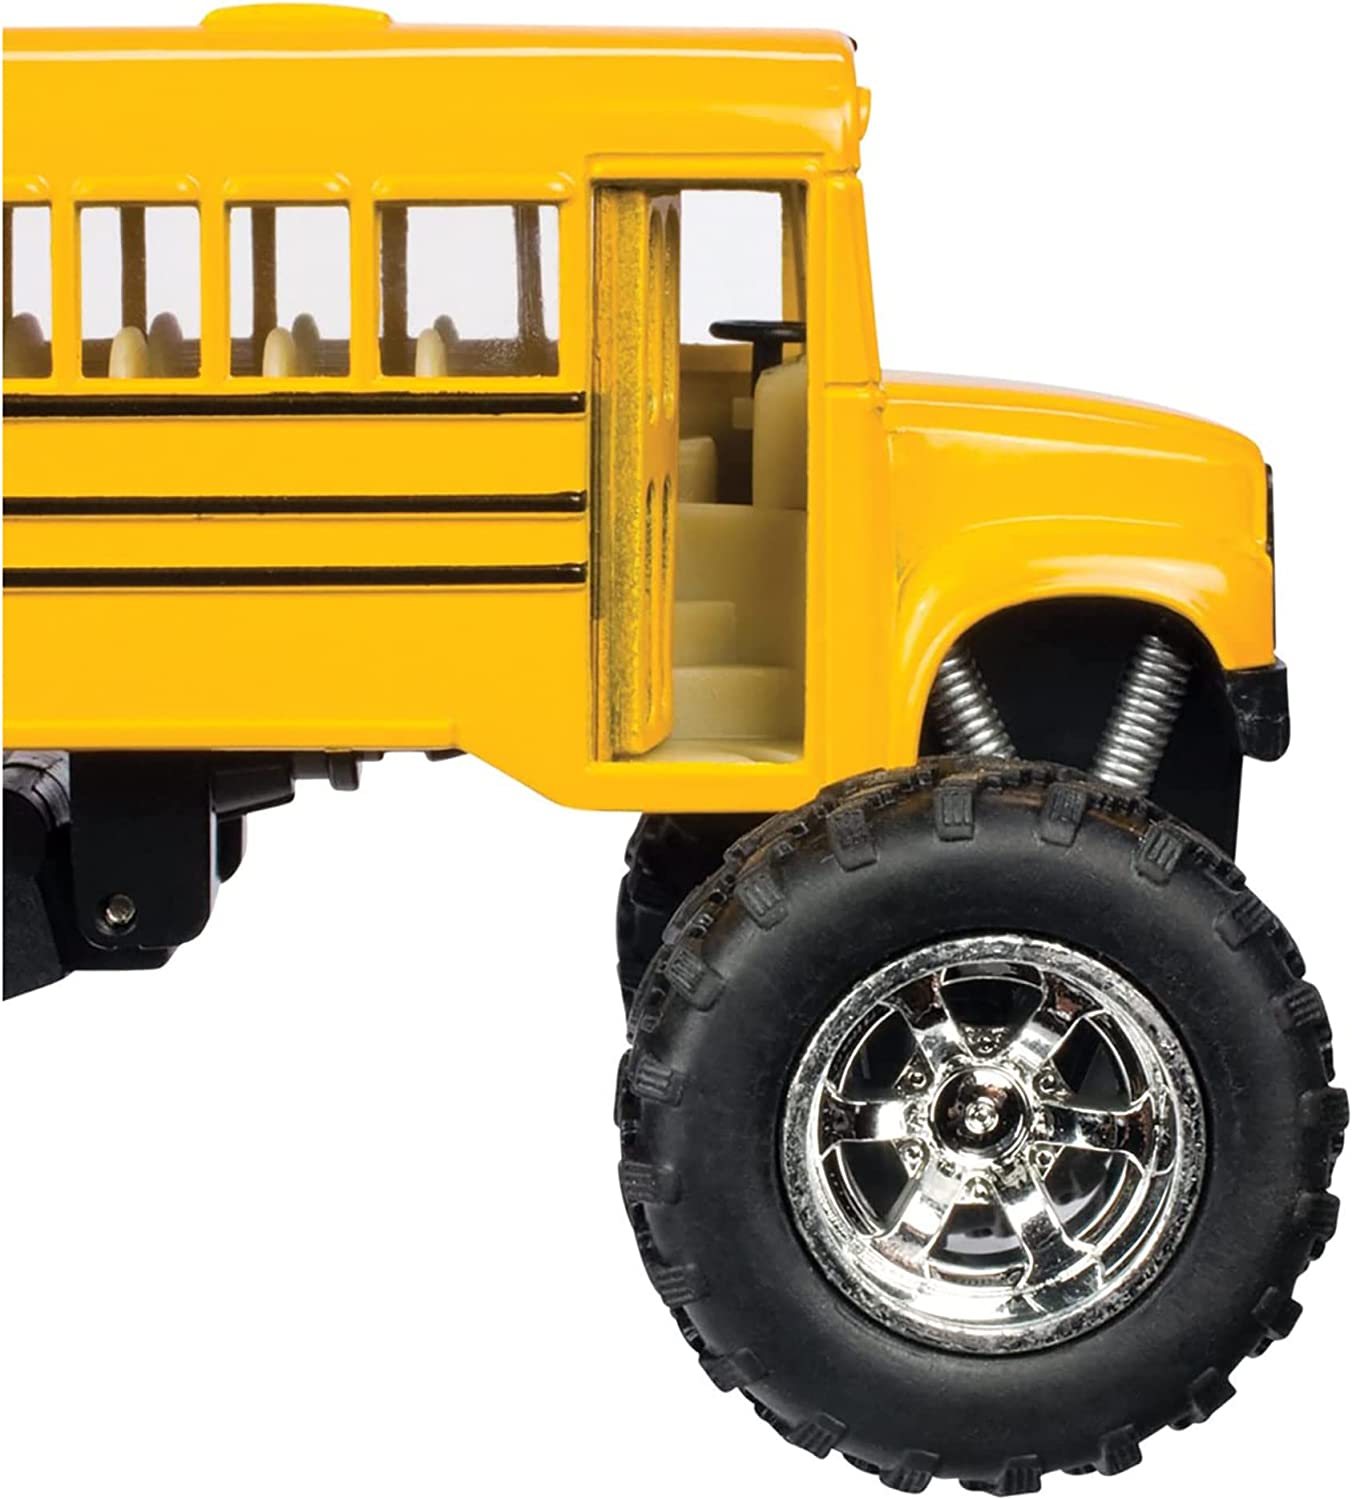 Toysmith 5020 Monster Bus, 5-Inch - image 3 of 7